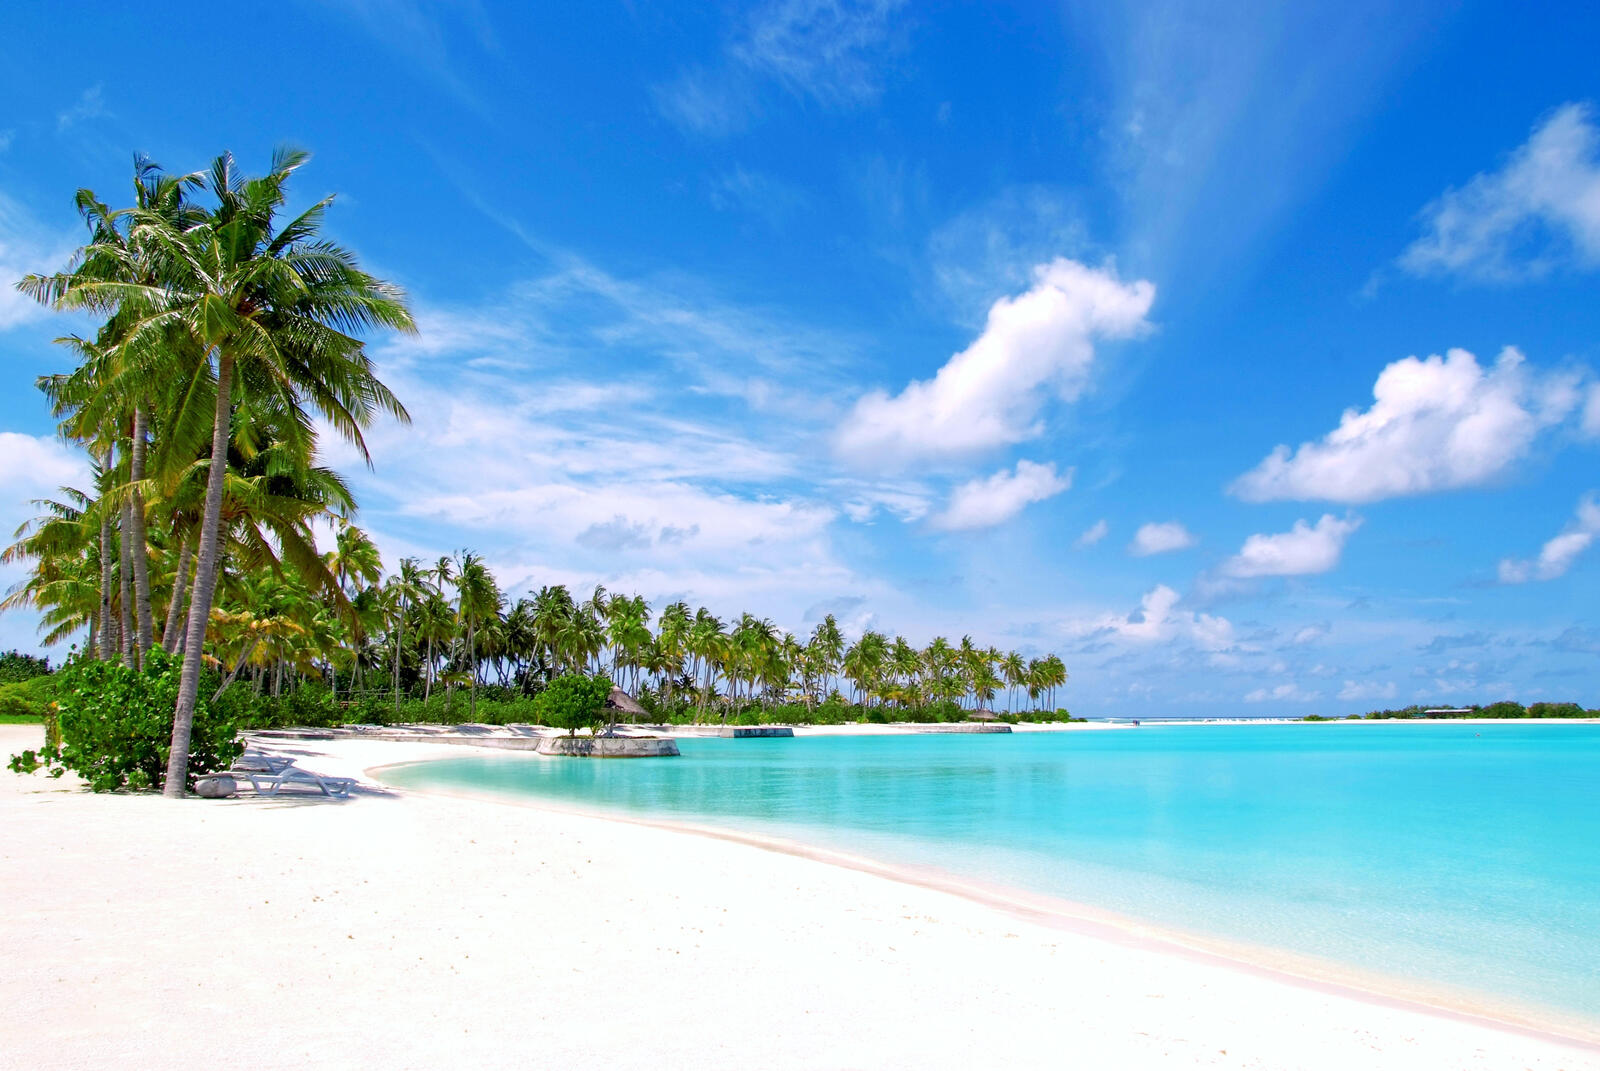 Wallpapers landscapes blue water white sand on the desktop